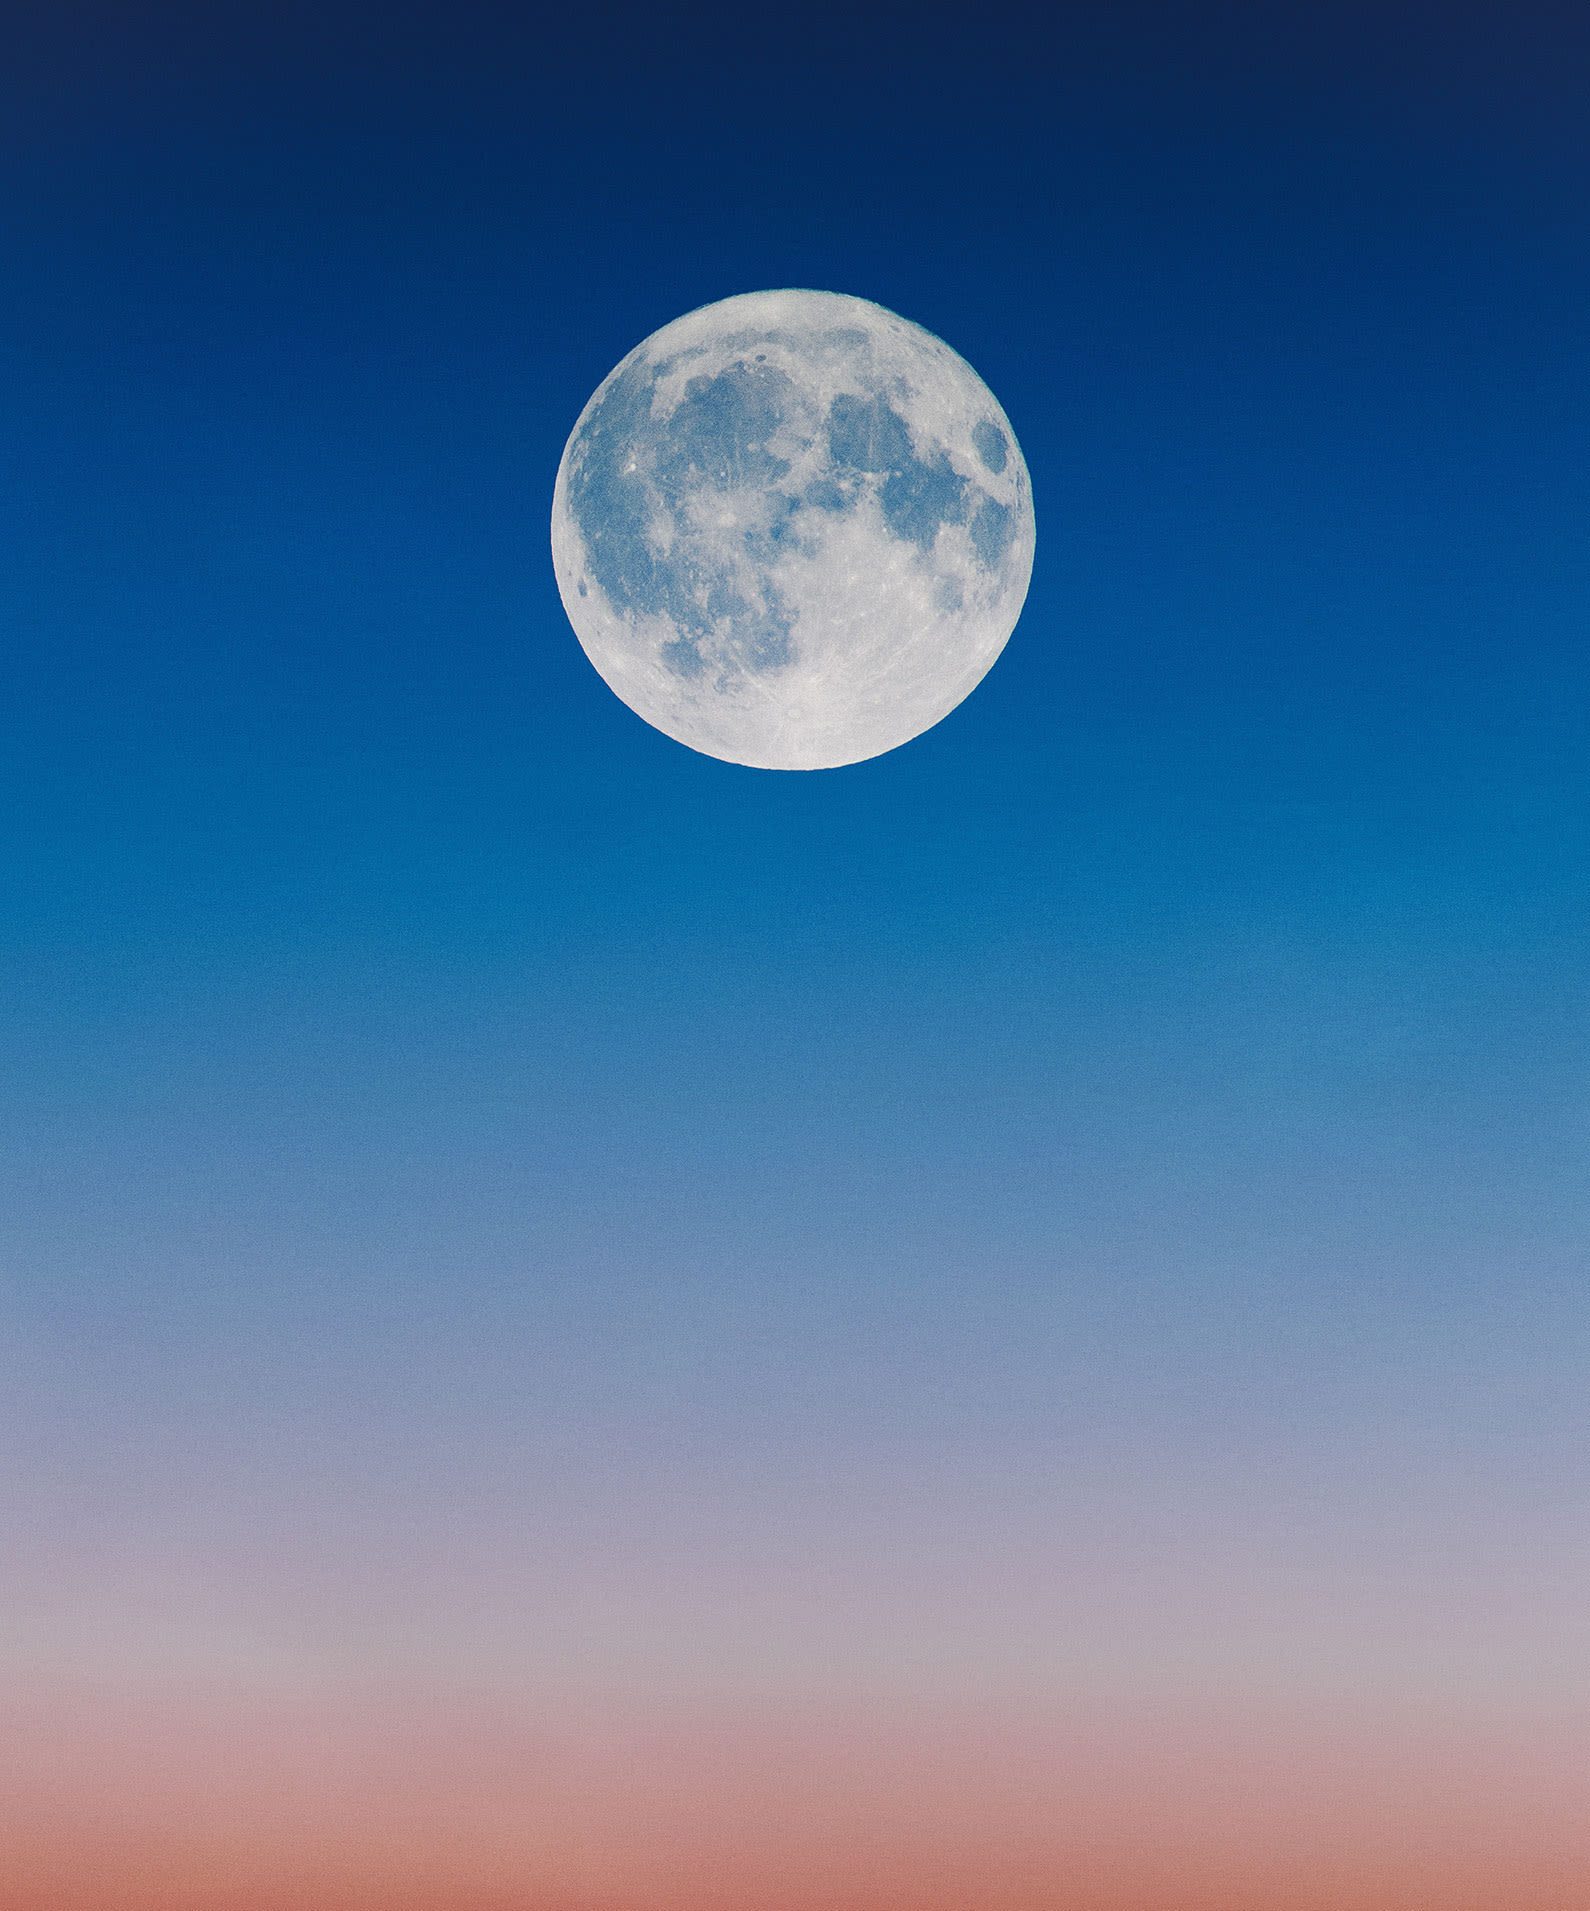 Full moon in a light blue and pink sky